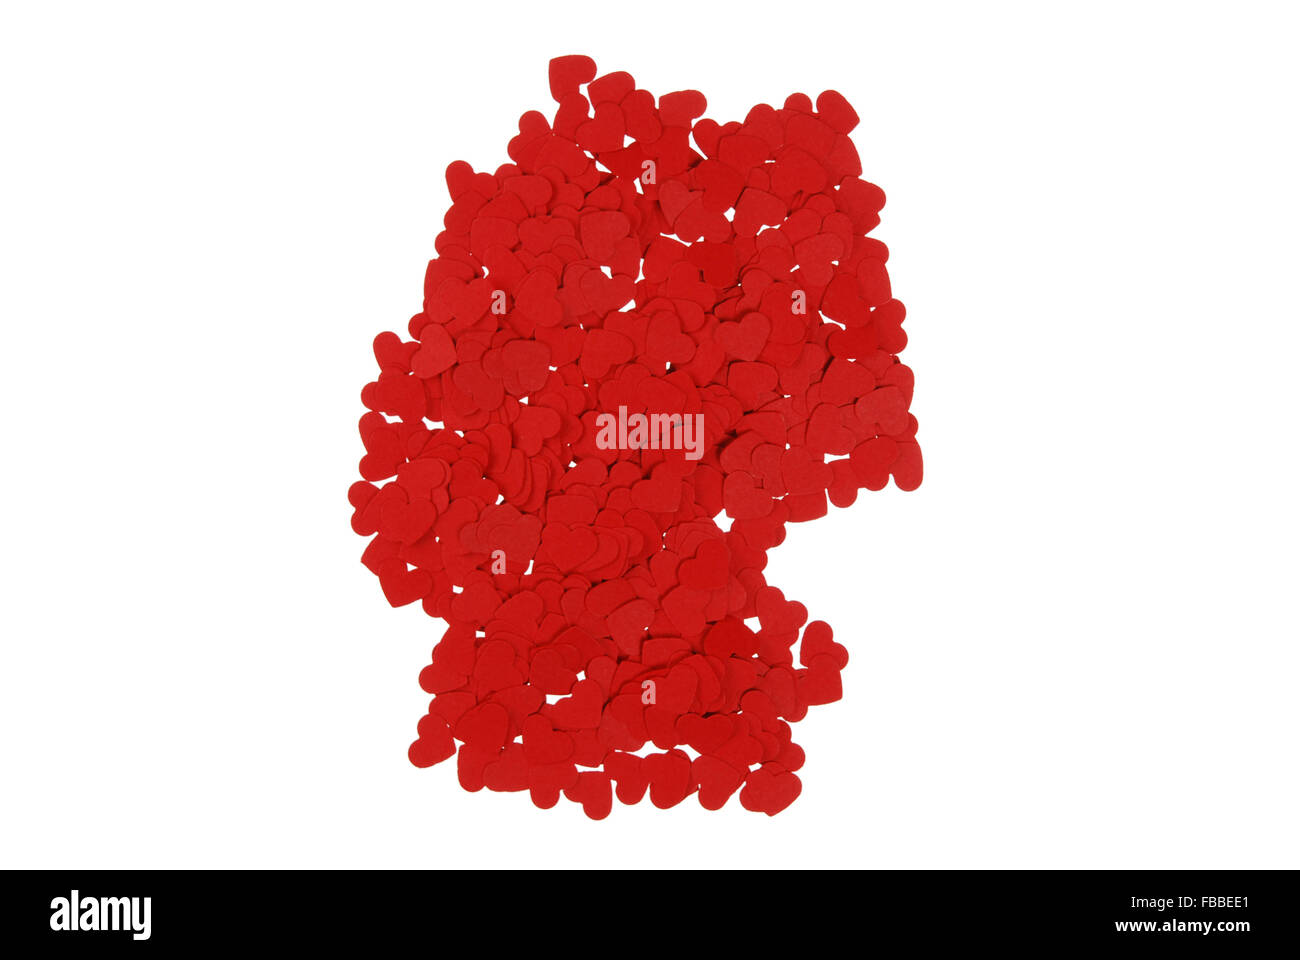 contour of the Germany built of small red hearts on a white background Stock Photo